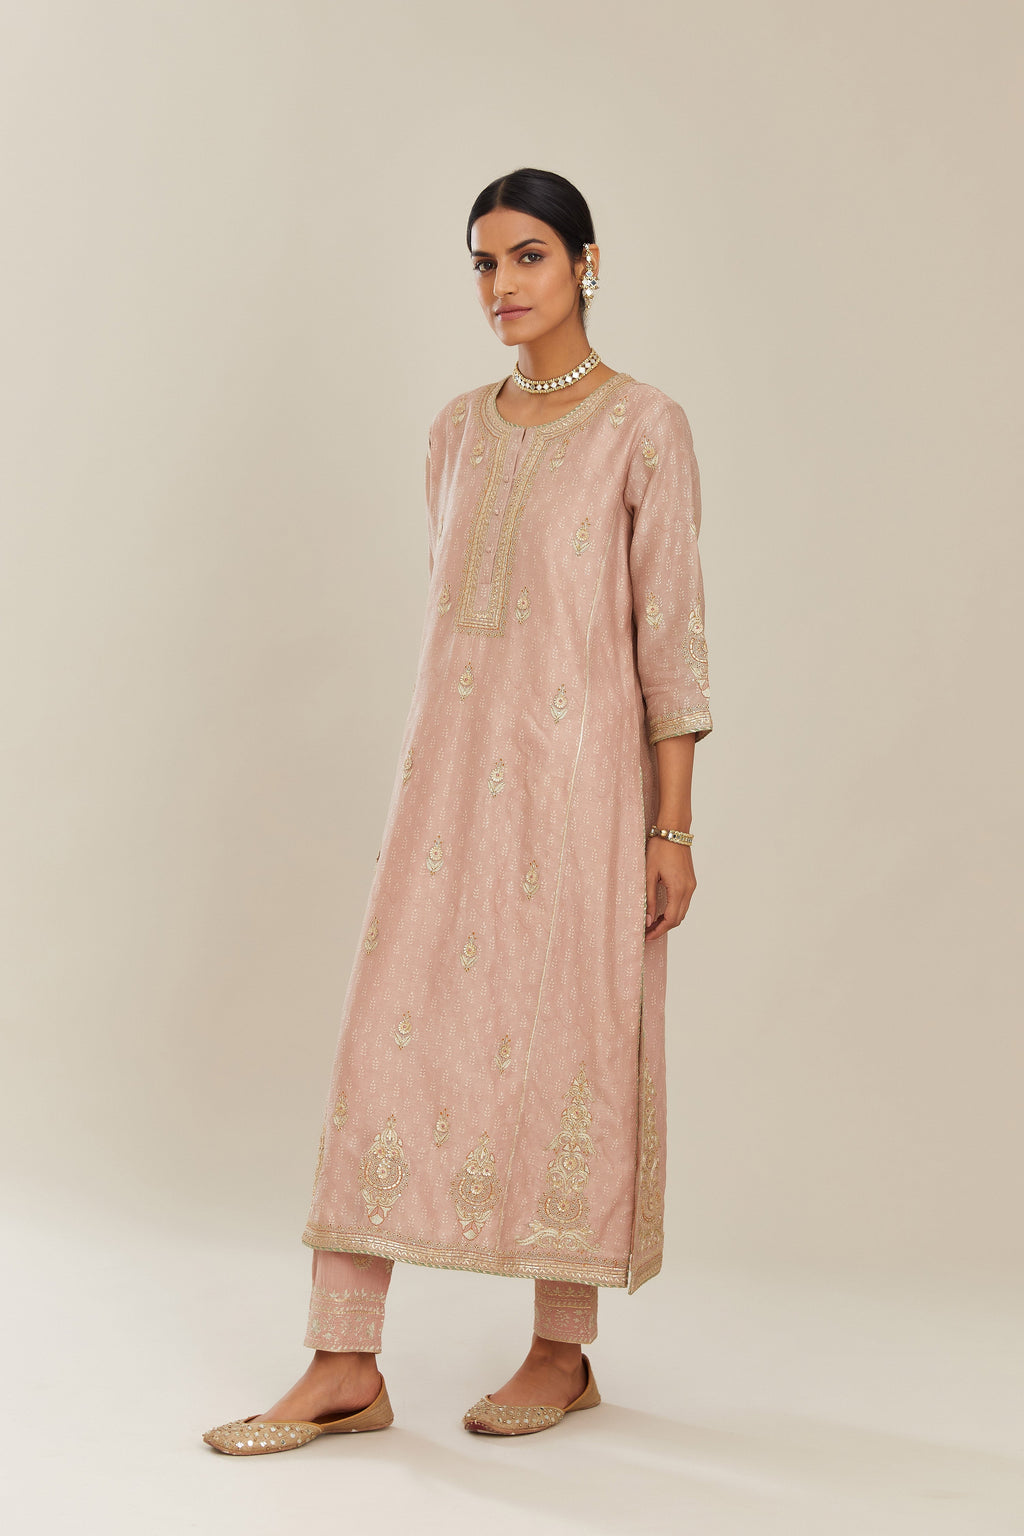 Old rose hand block printed silk chanderi kurta set with side panels, highlighted with gold gota and zari embroidery.